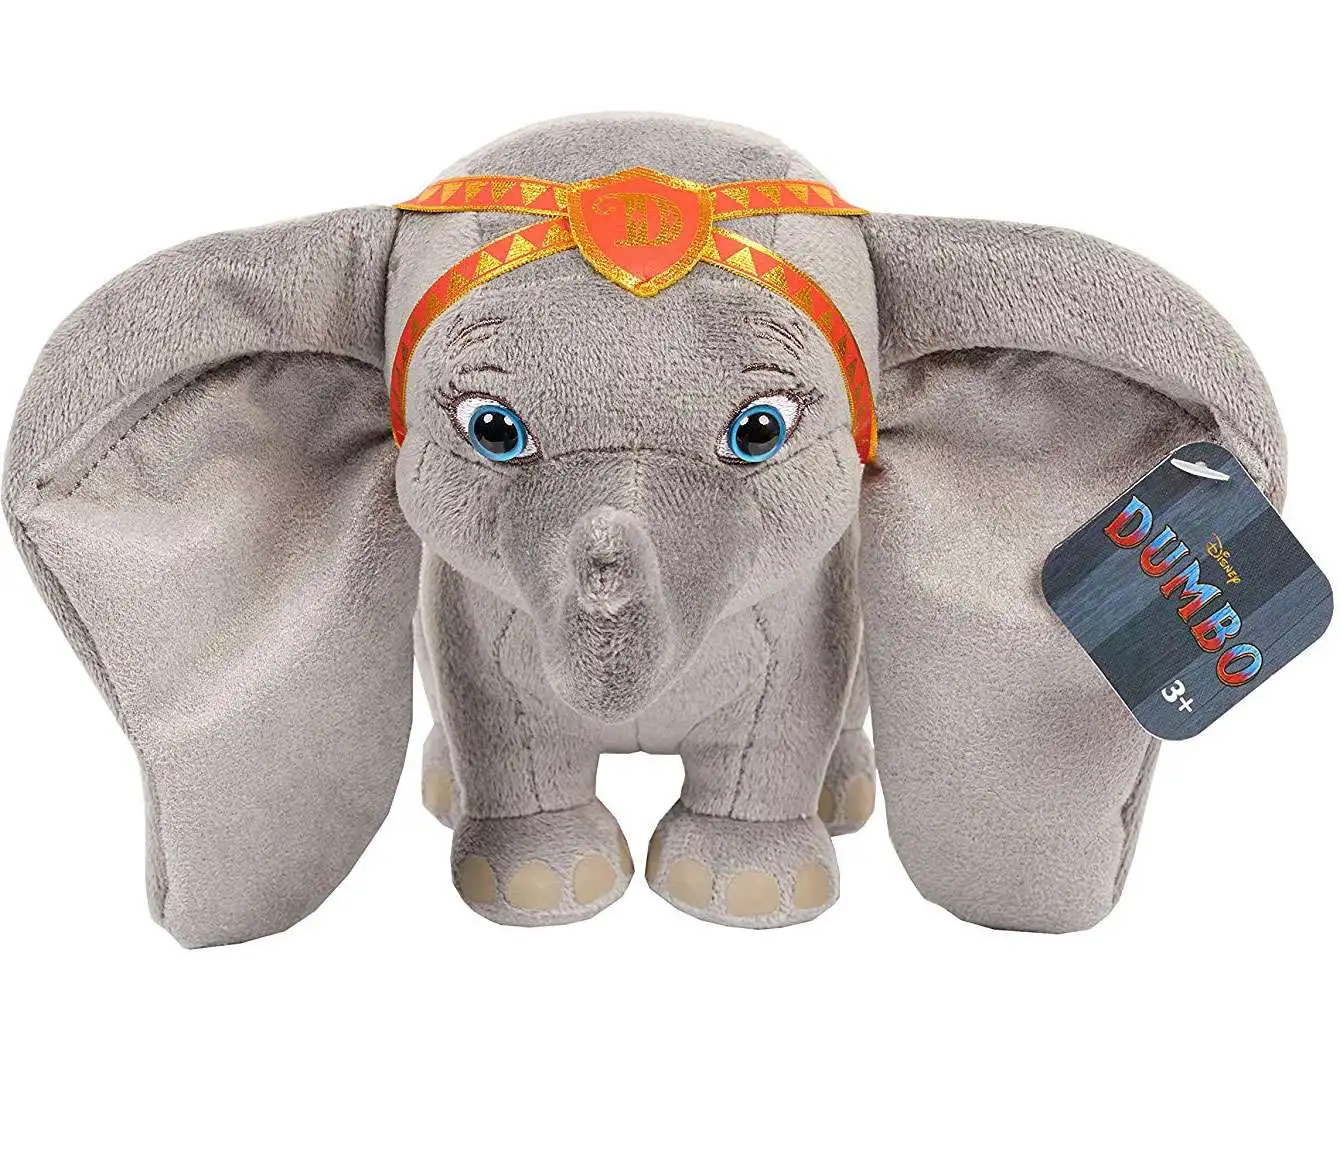 DISNEY'S DUMBO LIVE ACTION 6" PLUSH IN FIREFIGHTER OUTFIT 